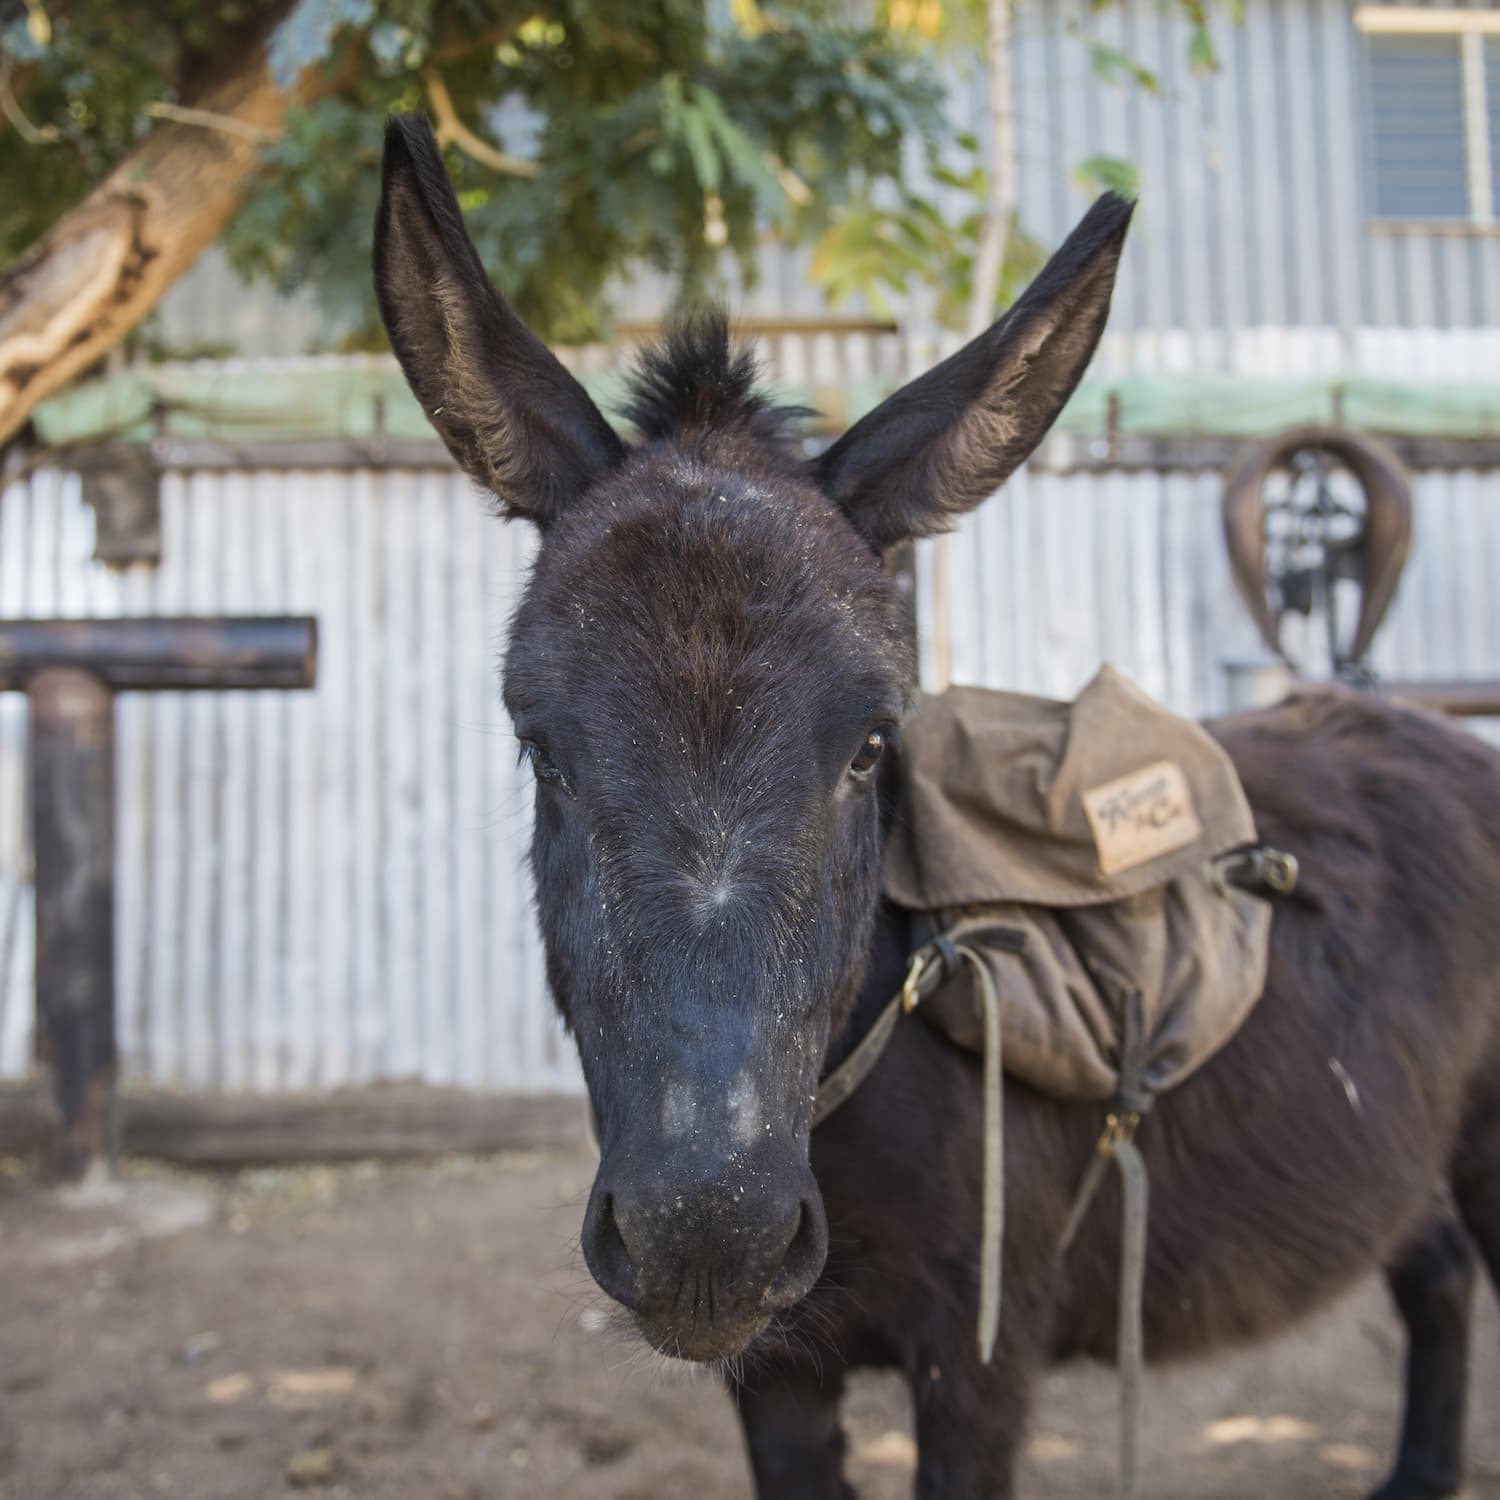 Donkey with pack saddle standing in a yard